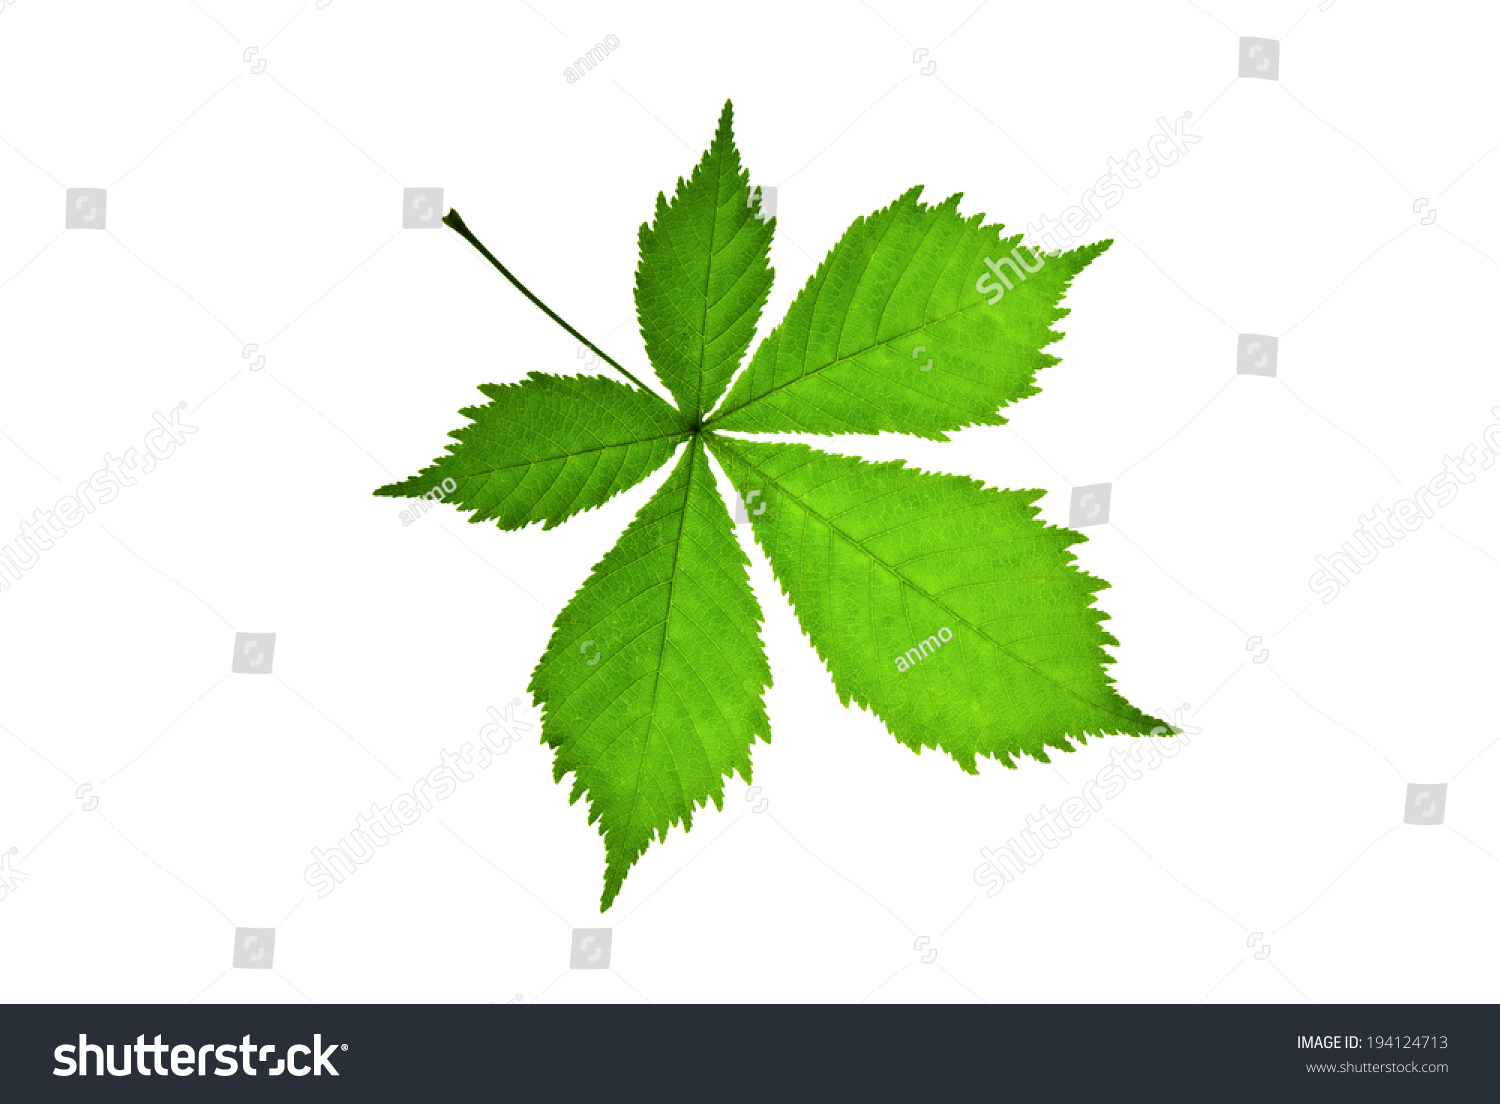 1,856 Jagged edge leaves Images, Stock Photos & Vectors | Shutterstock